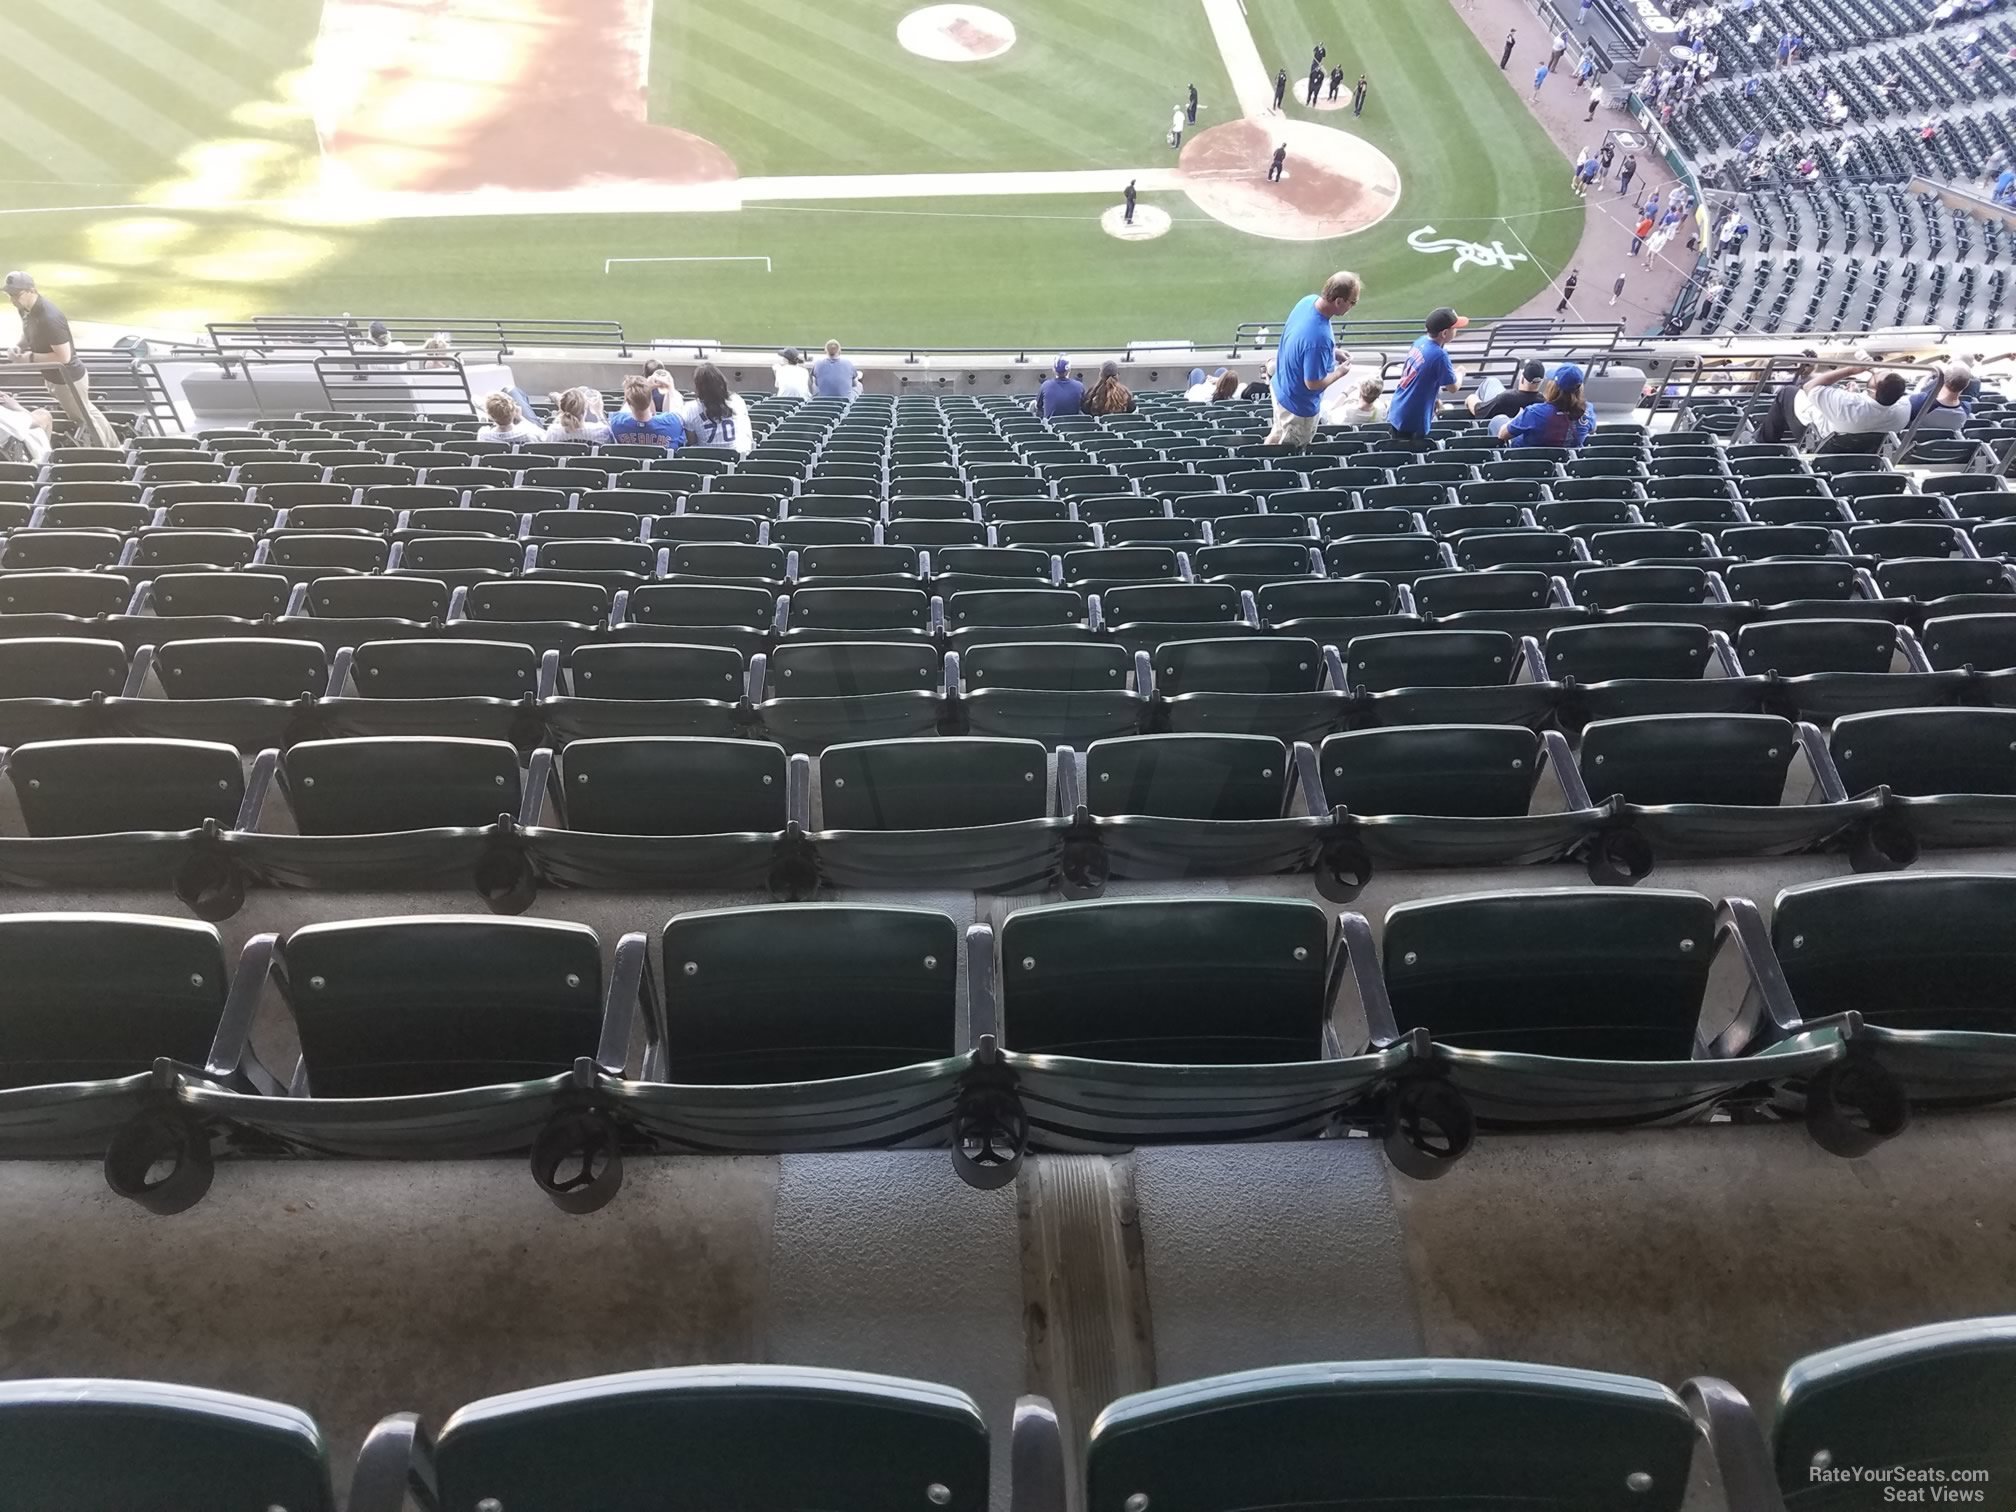 section 538 seats